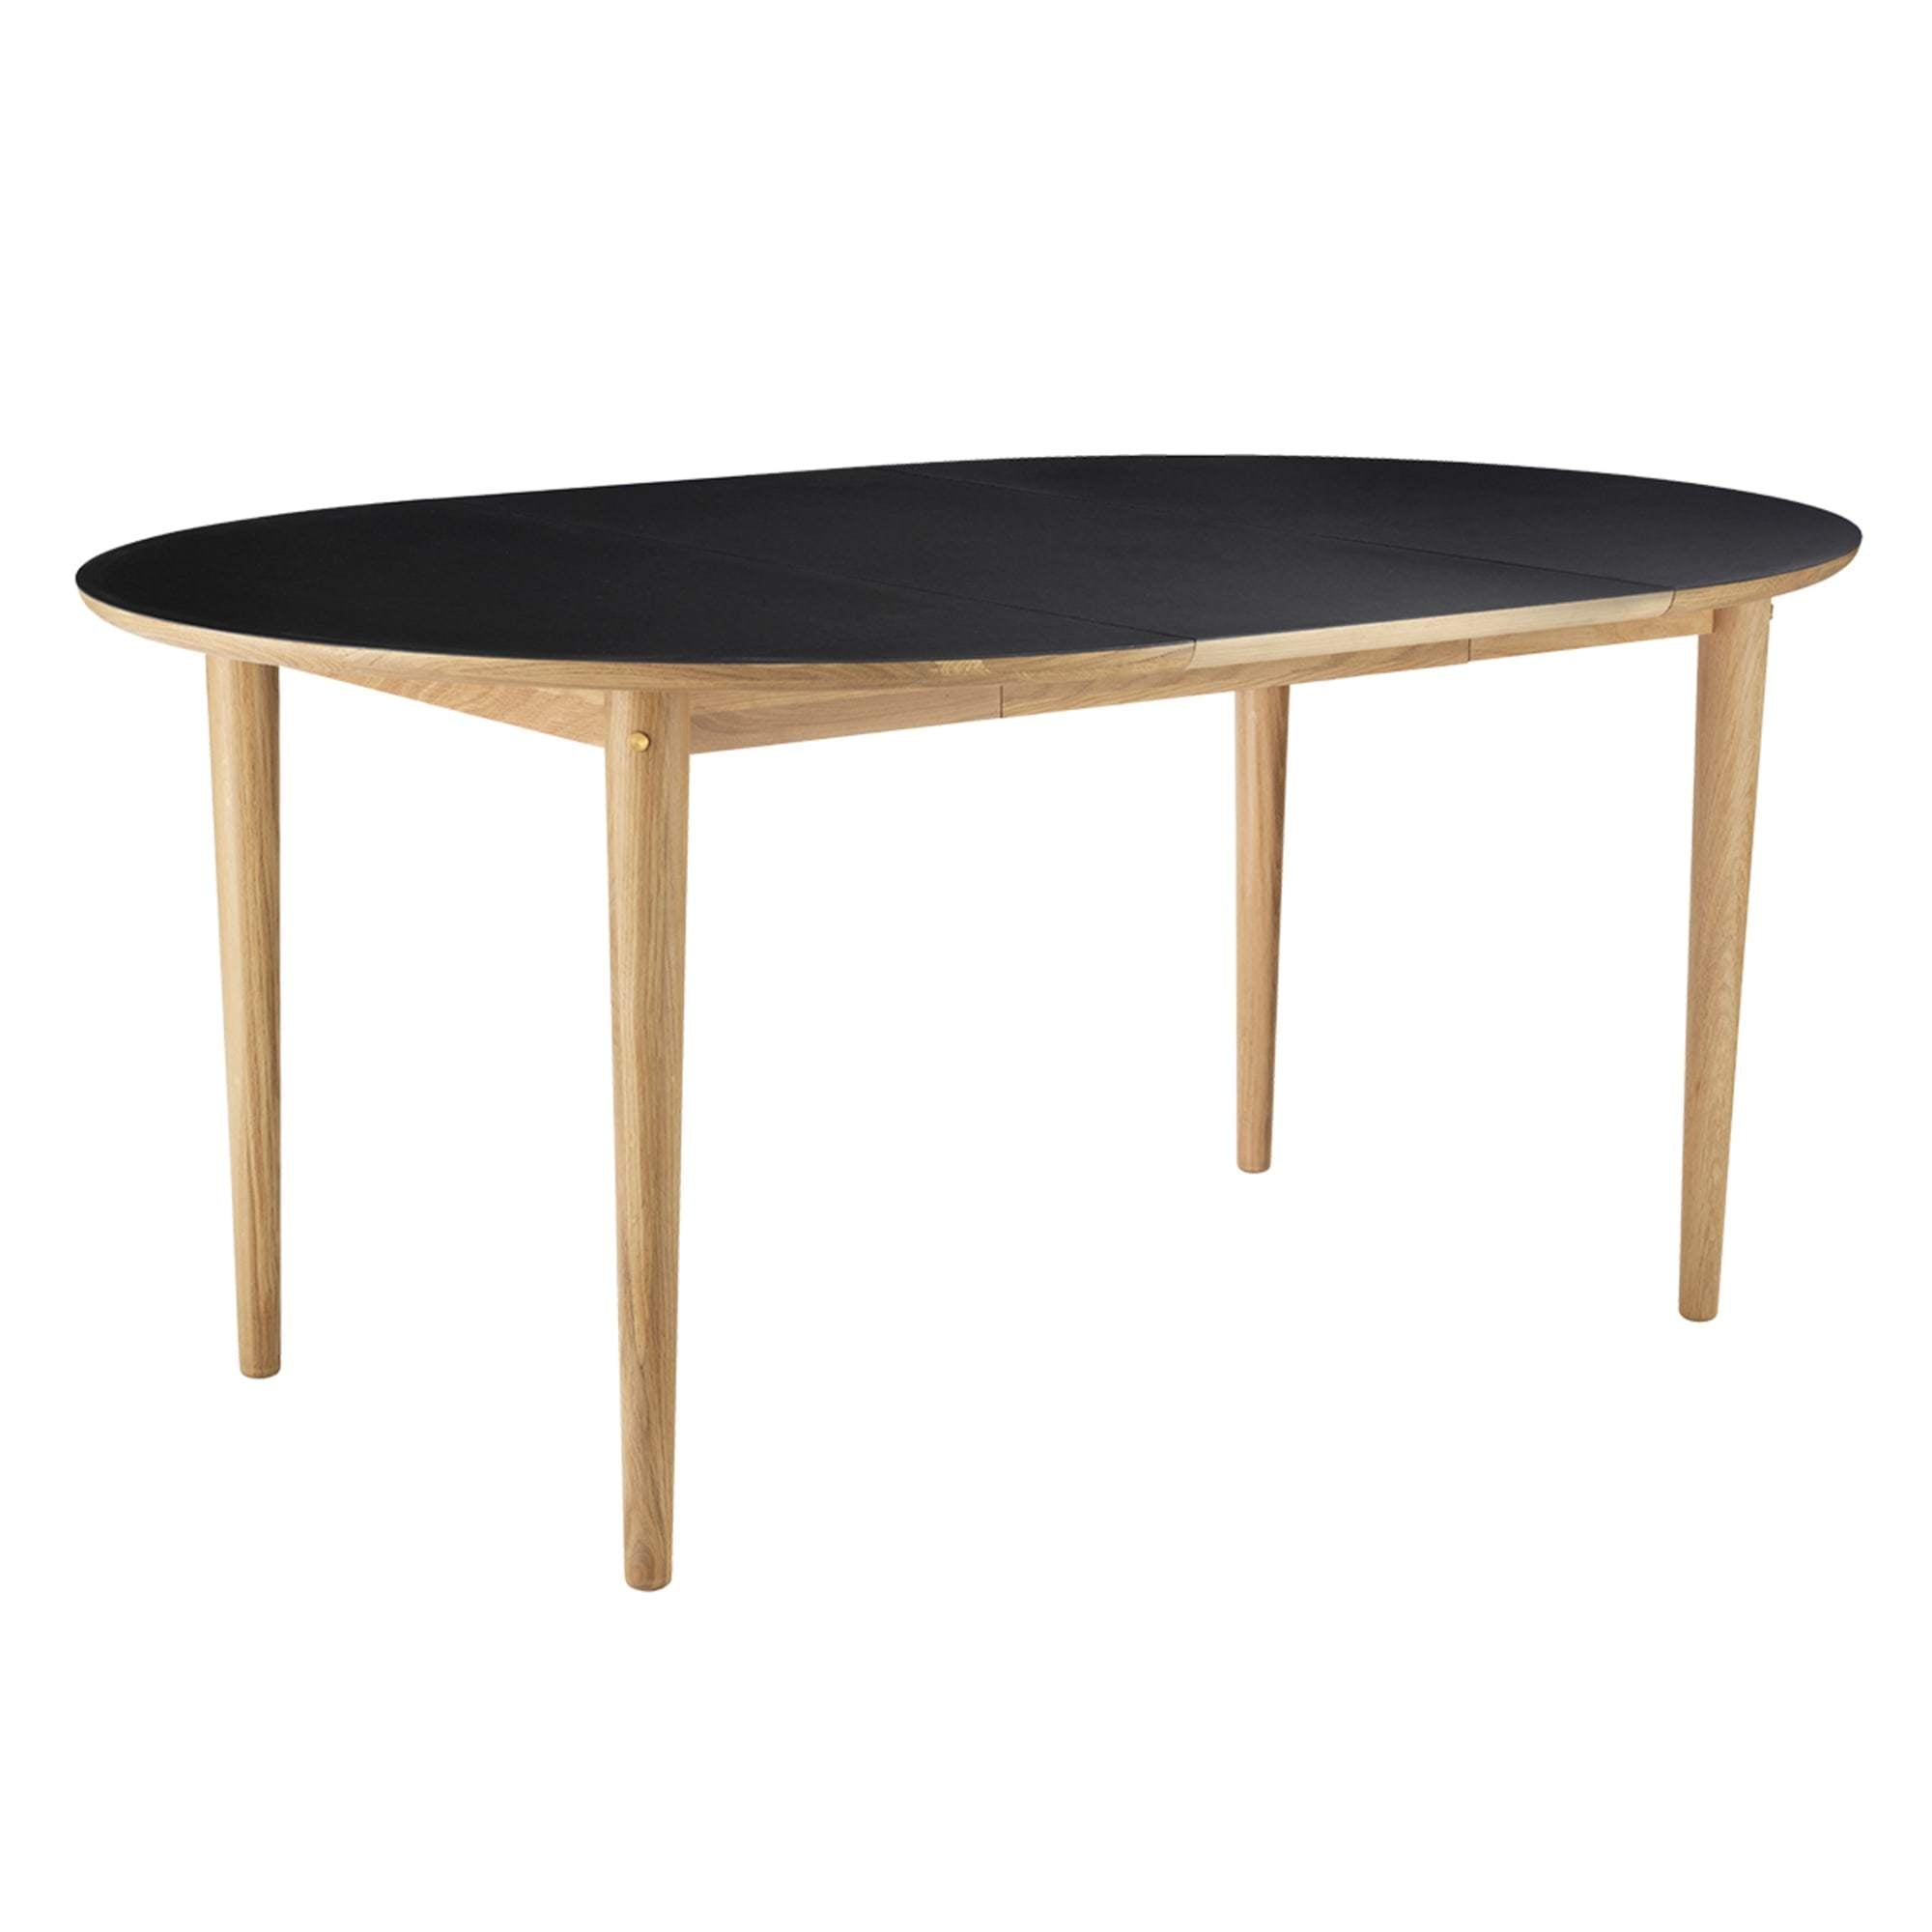 Fdb Møbler C62 E Dining Table With Pull Out Function, Natural/Black Linoleum